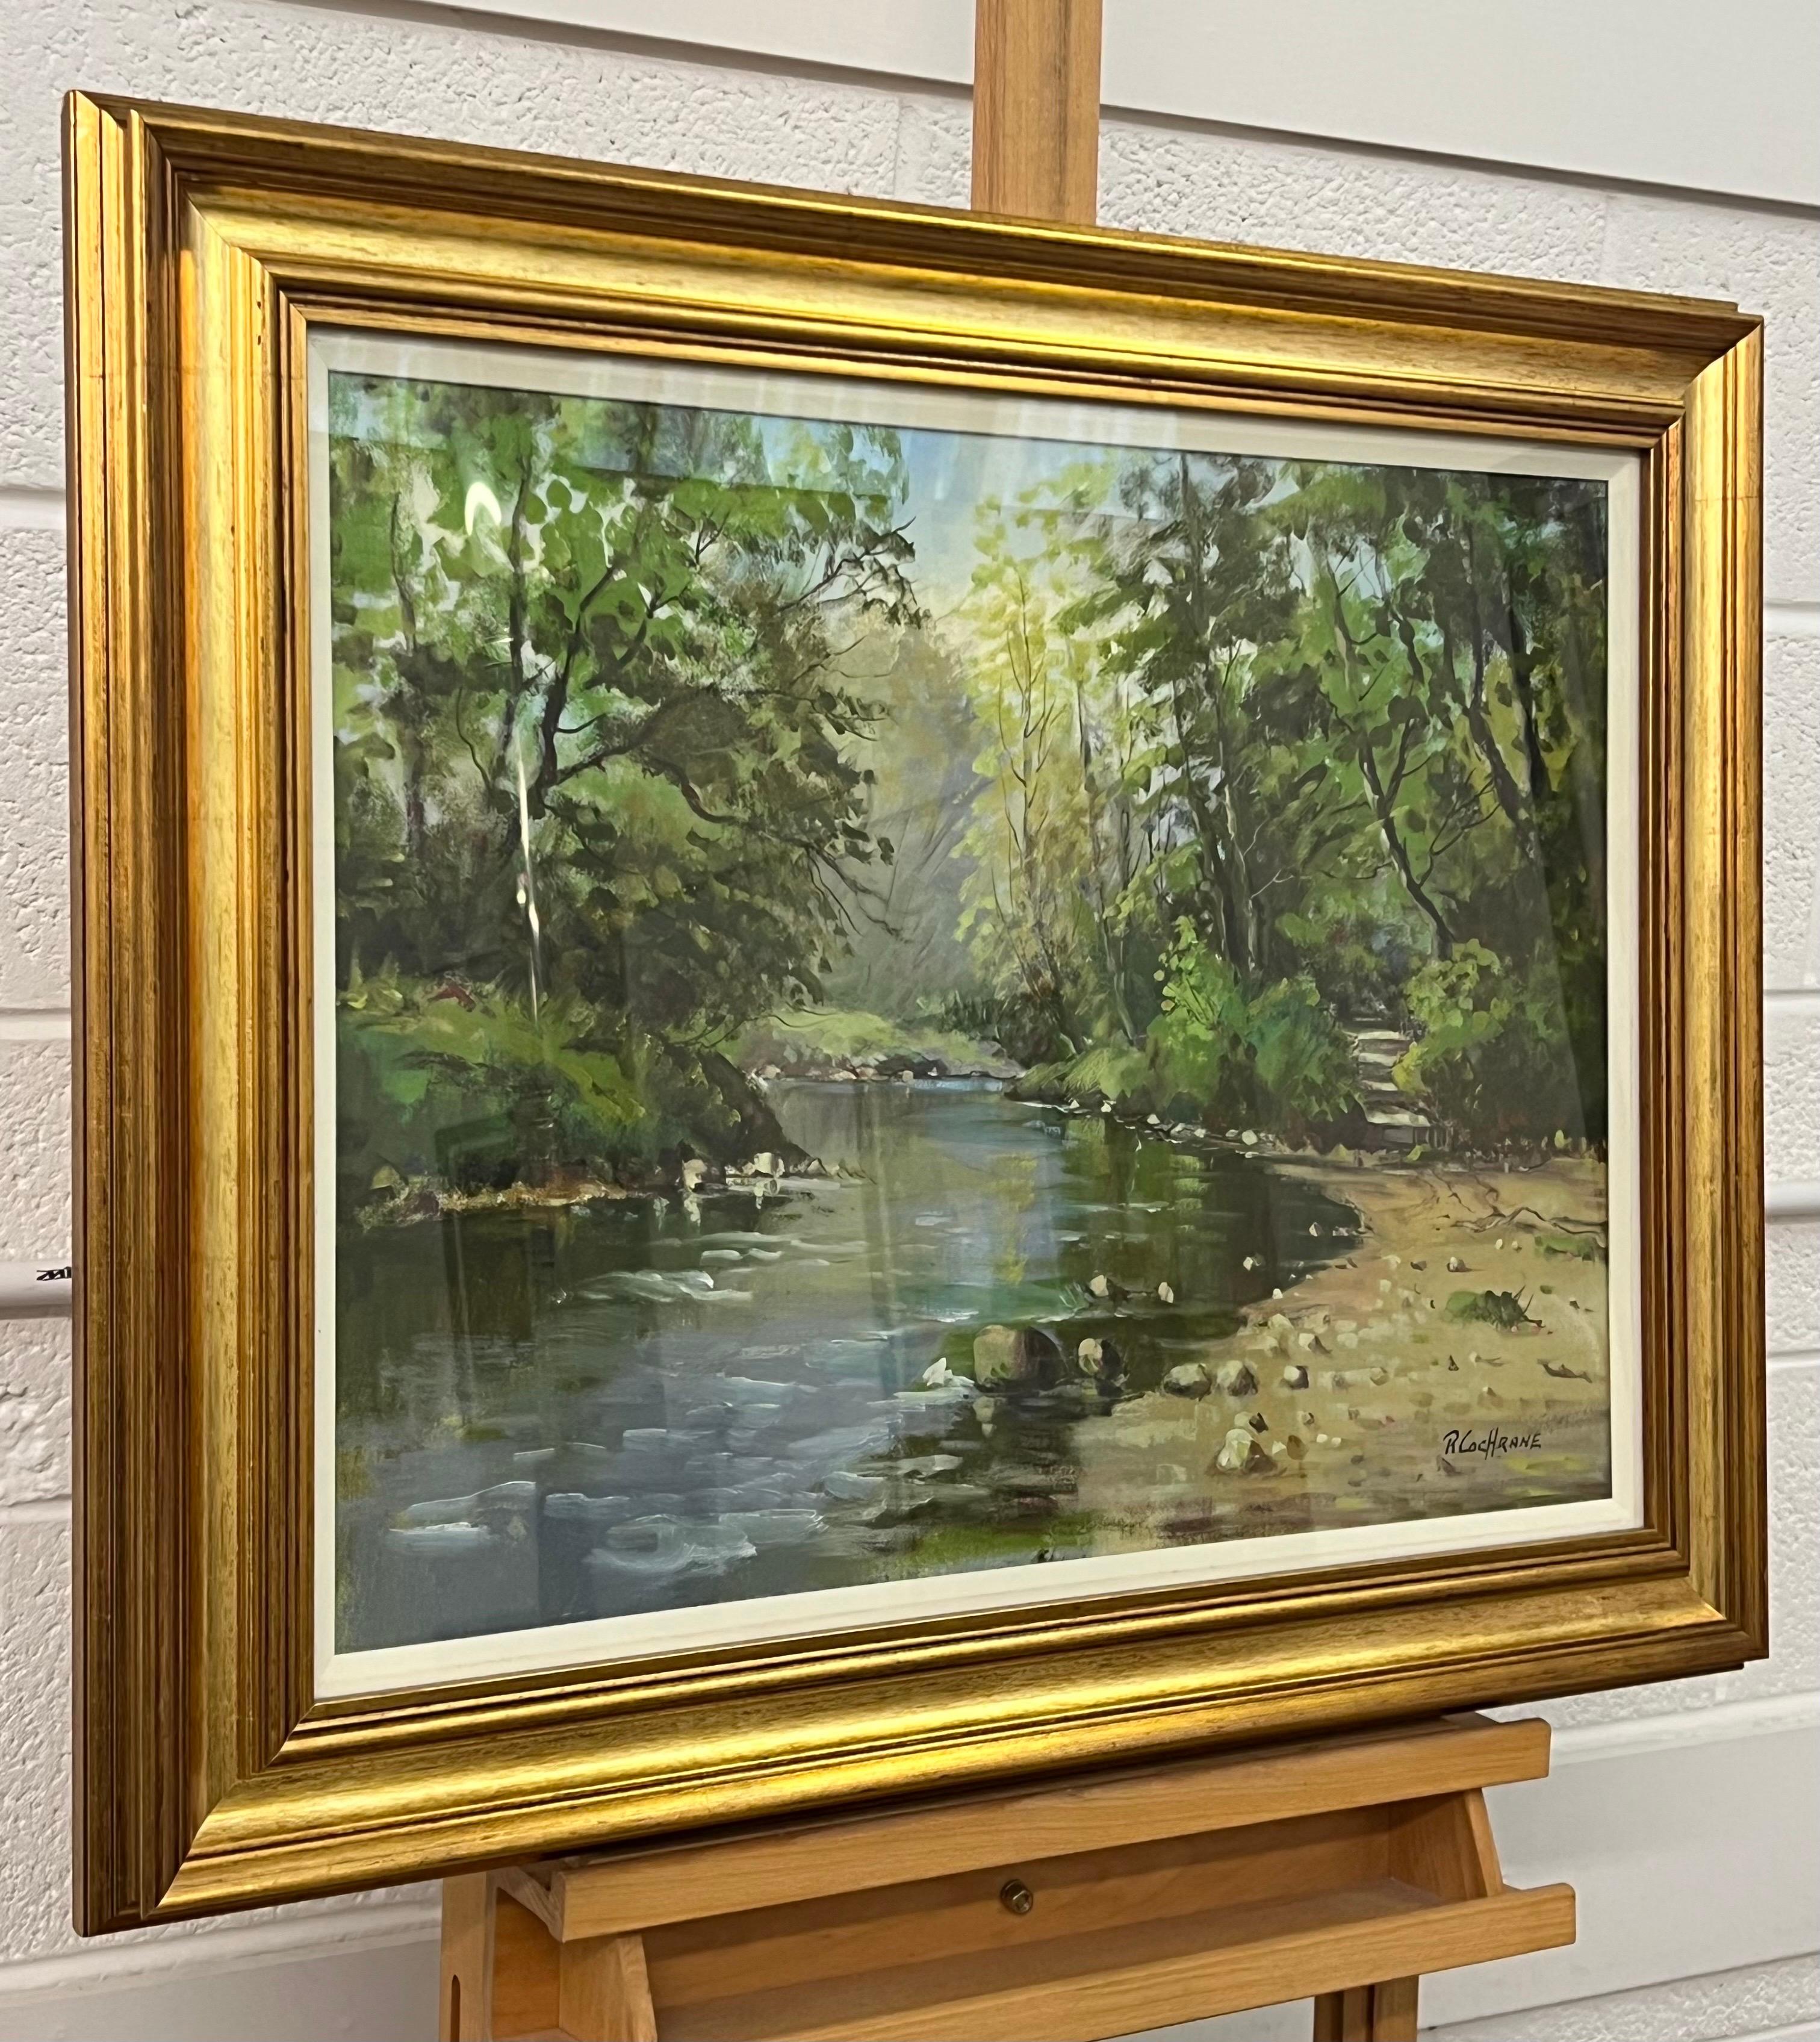 Vintage Post-Impressionist Painting of a Tree-Lined River in the Irish Countryside by 20th Century Irish Artist, Ray Cochrane. 

Art measures 24 x 18 inches 
Frame measures 30 x 24 inches 

This impressionistic 1980's vintage original is signed and